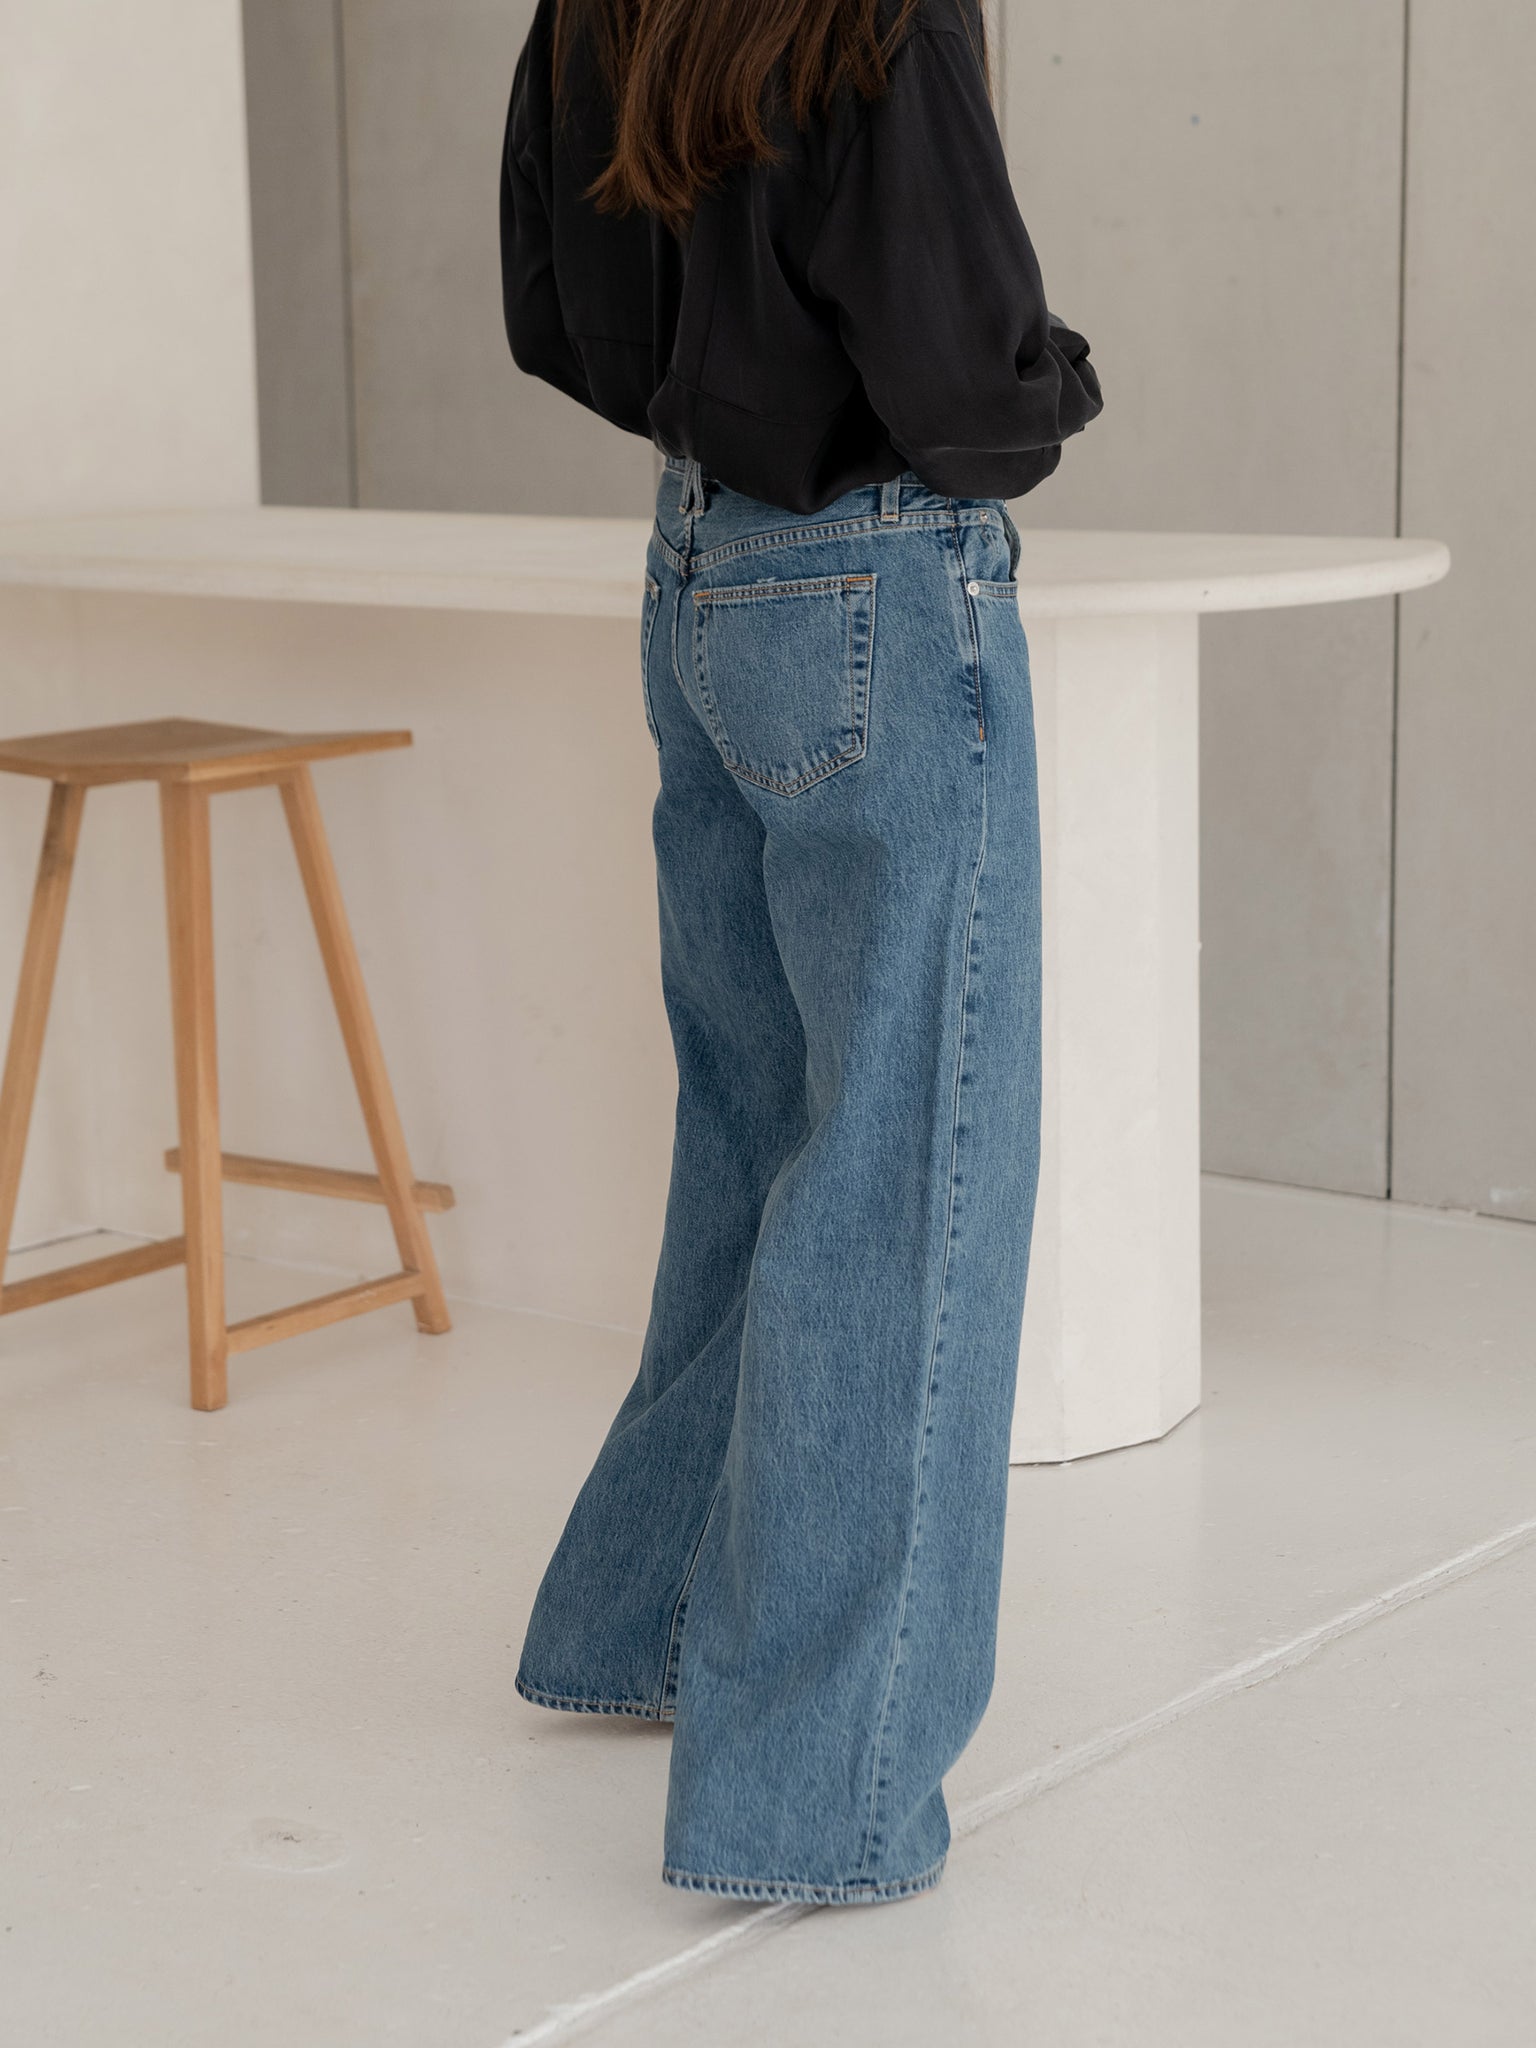 Slvrlake | Mica Low Rise Wide Leg Jean in Born To Run | The UNDONE by ...